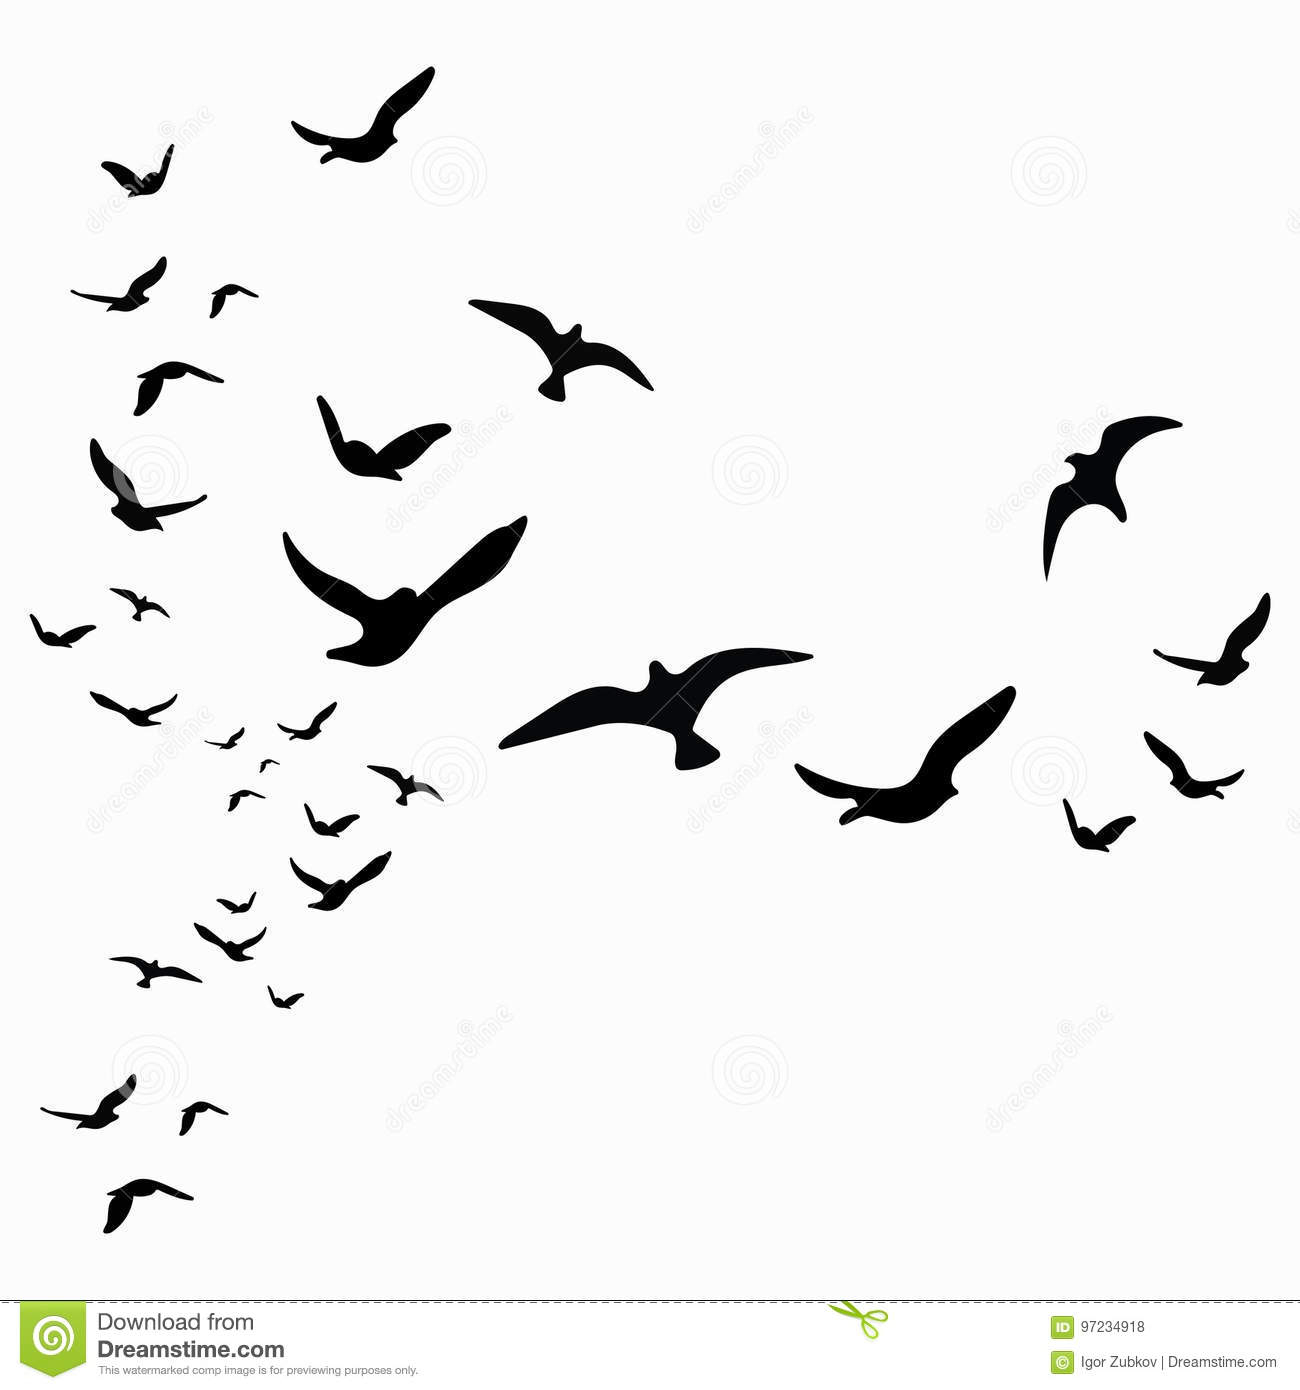 Silhouette Of A Flock Of Birds Black Contours Of Flying Birds regarding dimensions 1300 X 1390